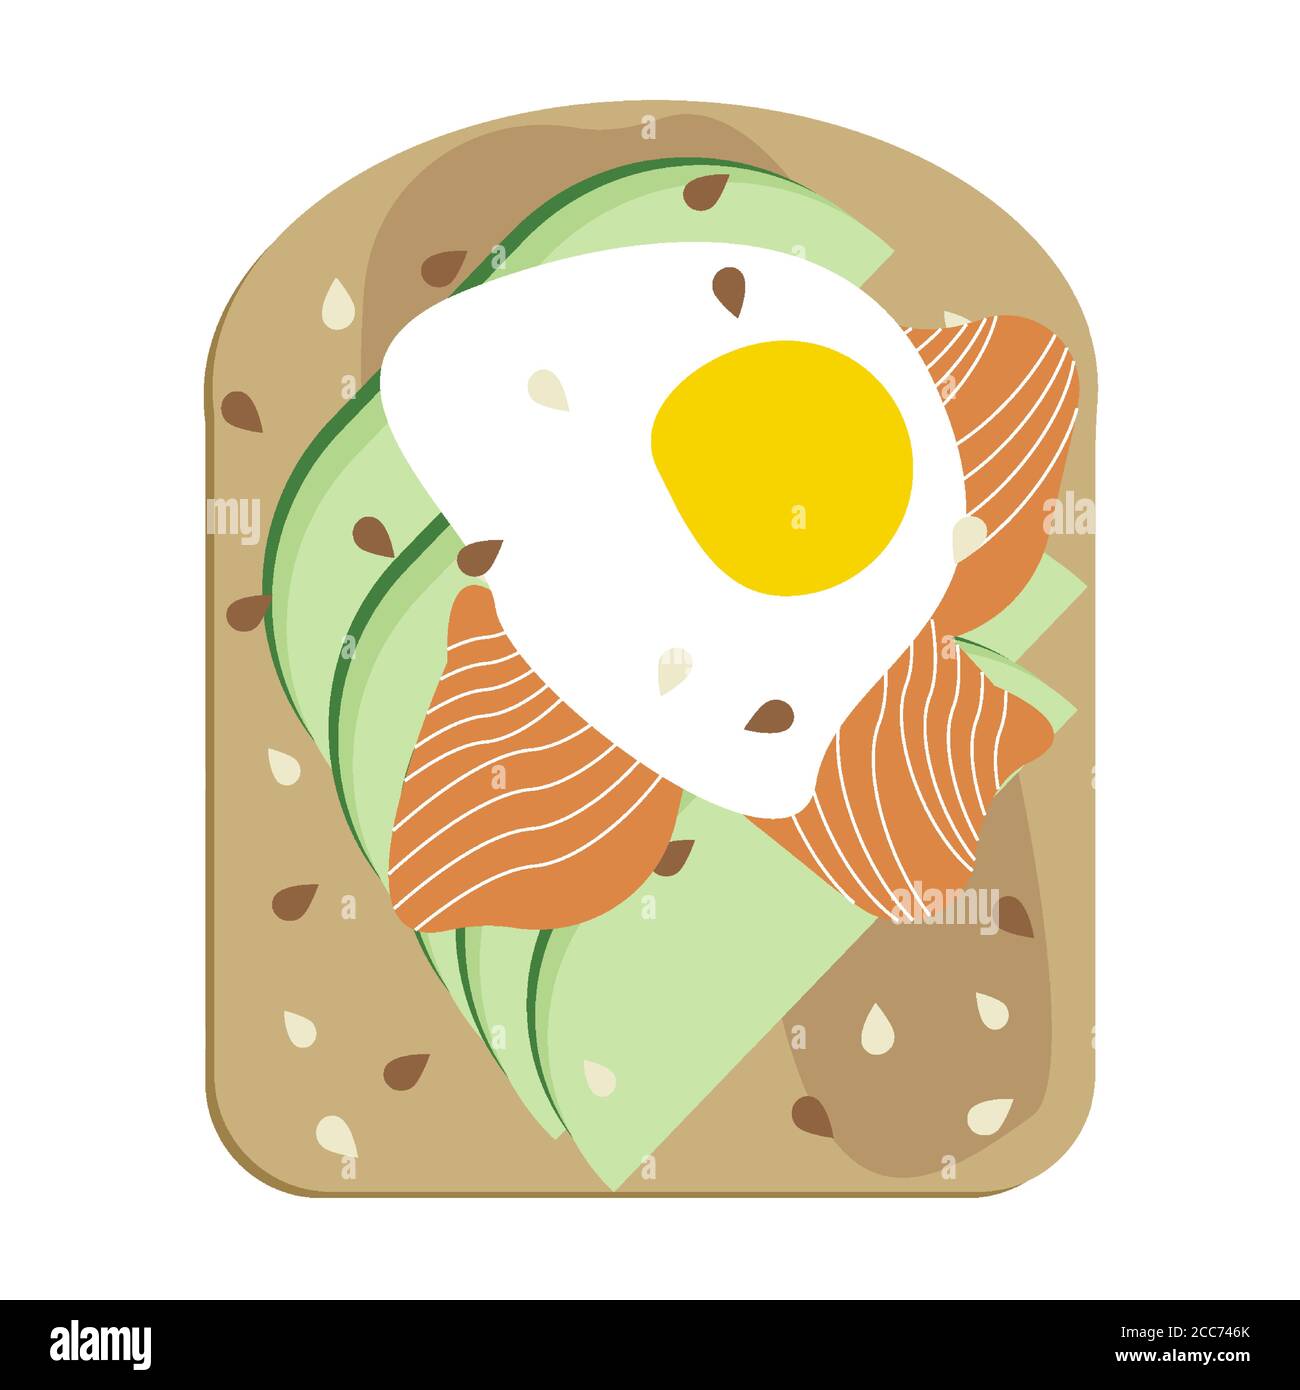 Avocado toast with poached egg and salmon vector illustration isolated. Avocado and smoked lox slices on bread, vegan sandwich with sesame seeds Stock Vector